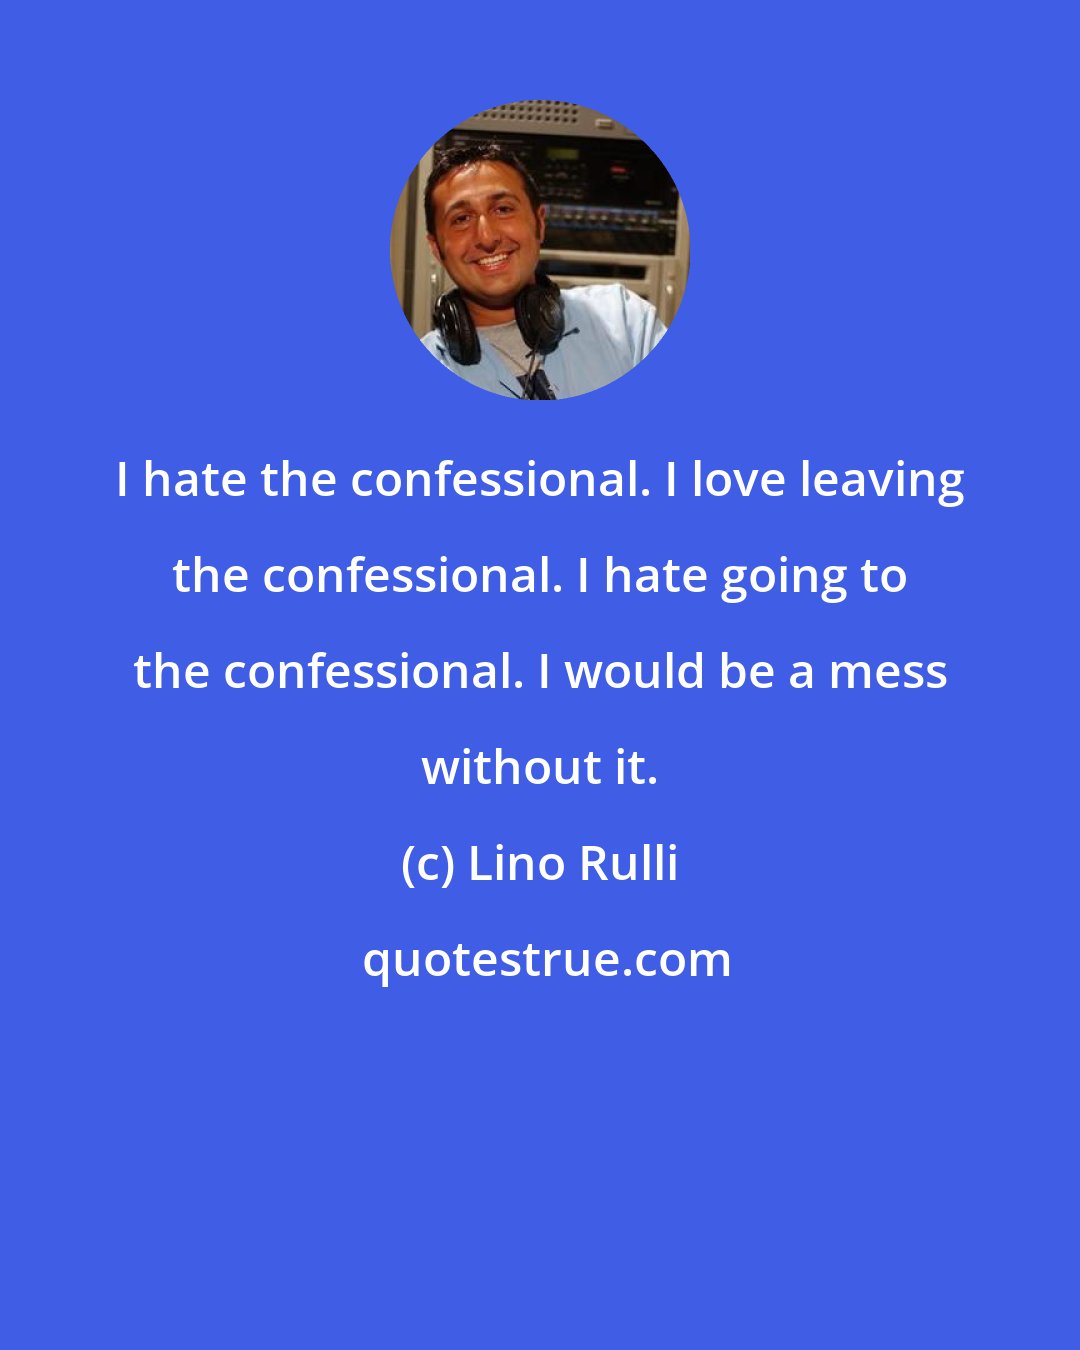 Lino Rulli: I hate the confessional. I love leaving the confessional. I hate going to the confessional. I would be a mess without it.